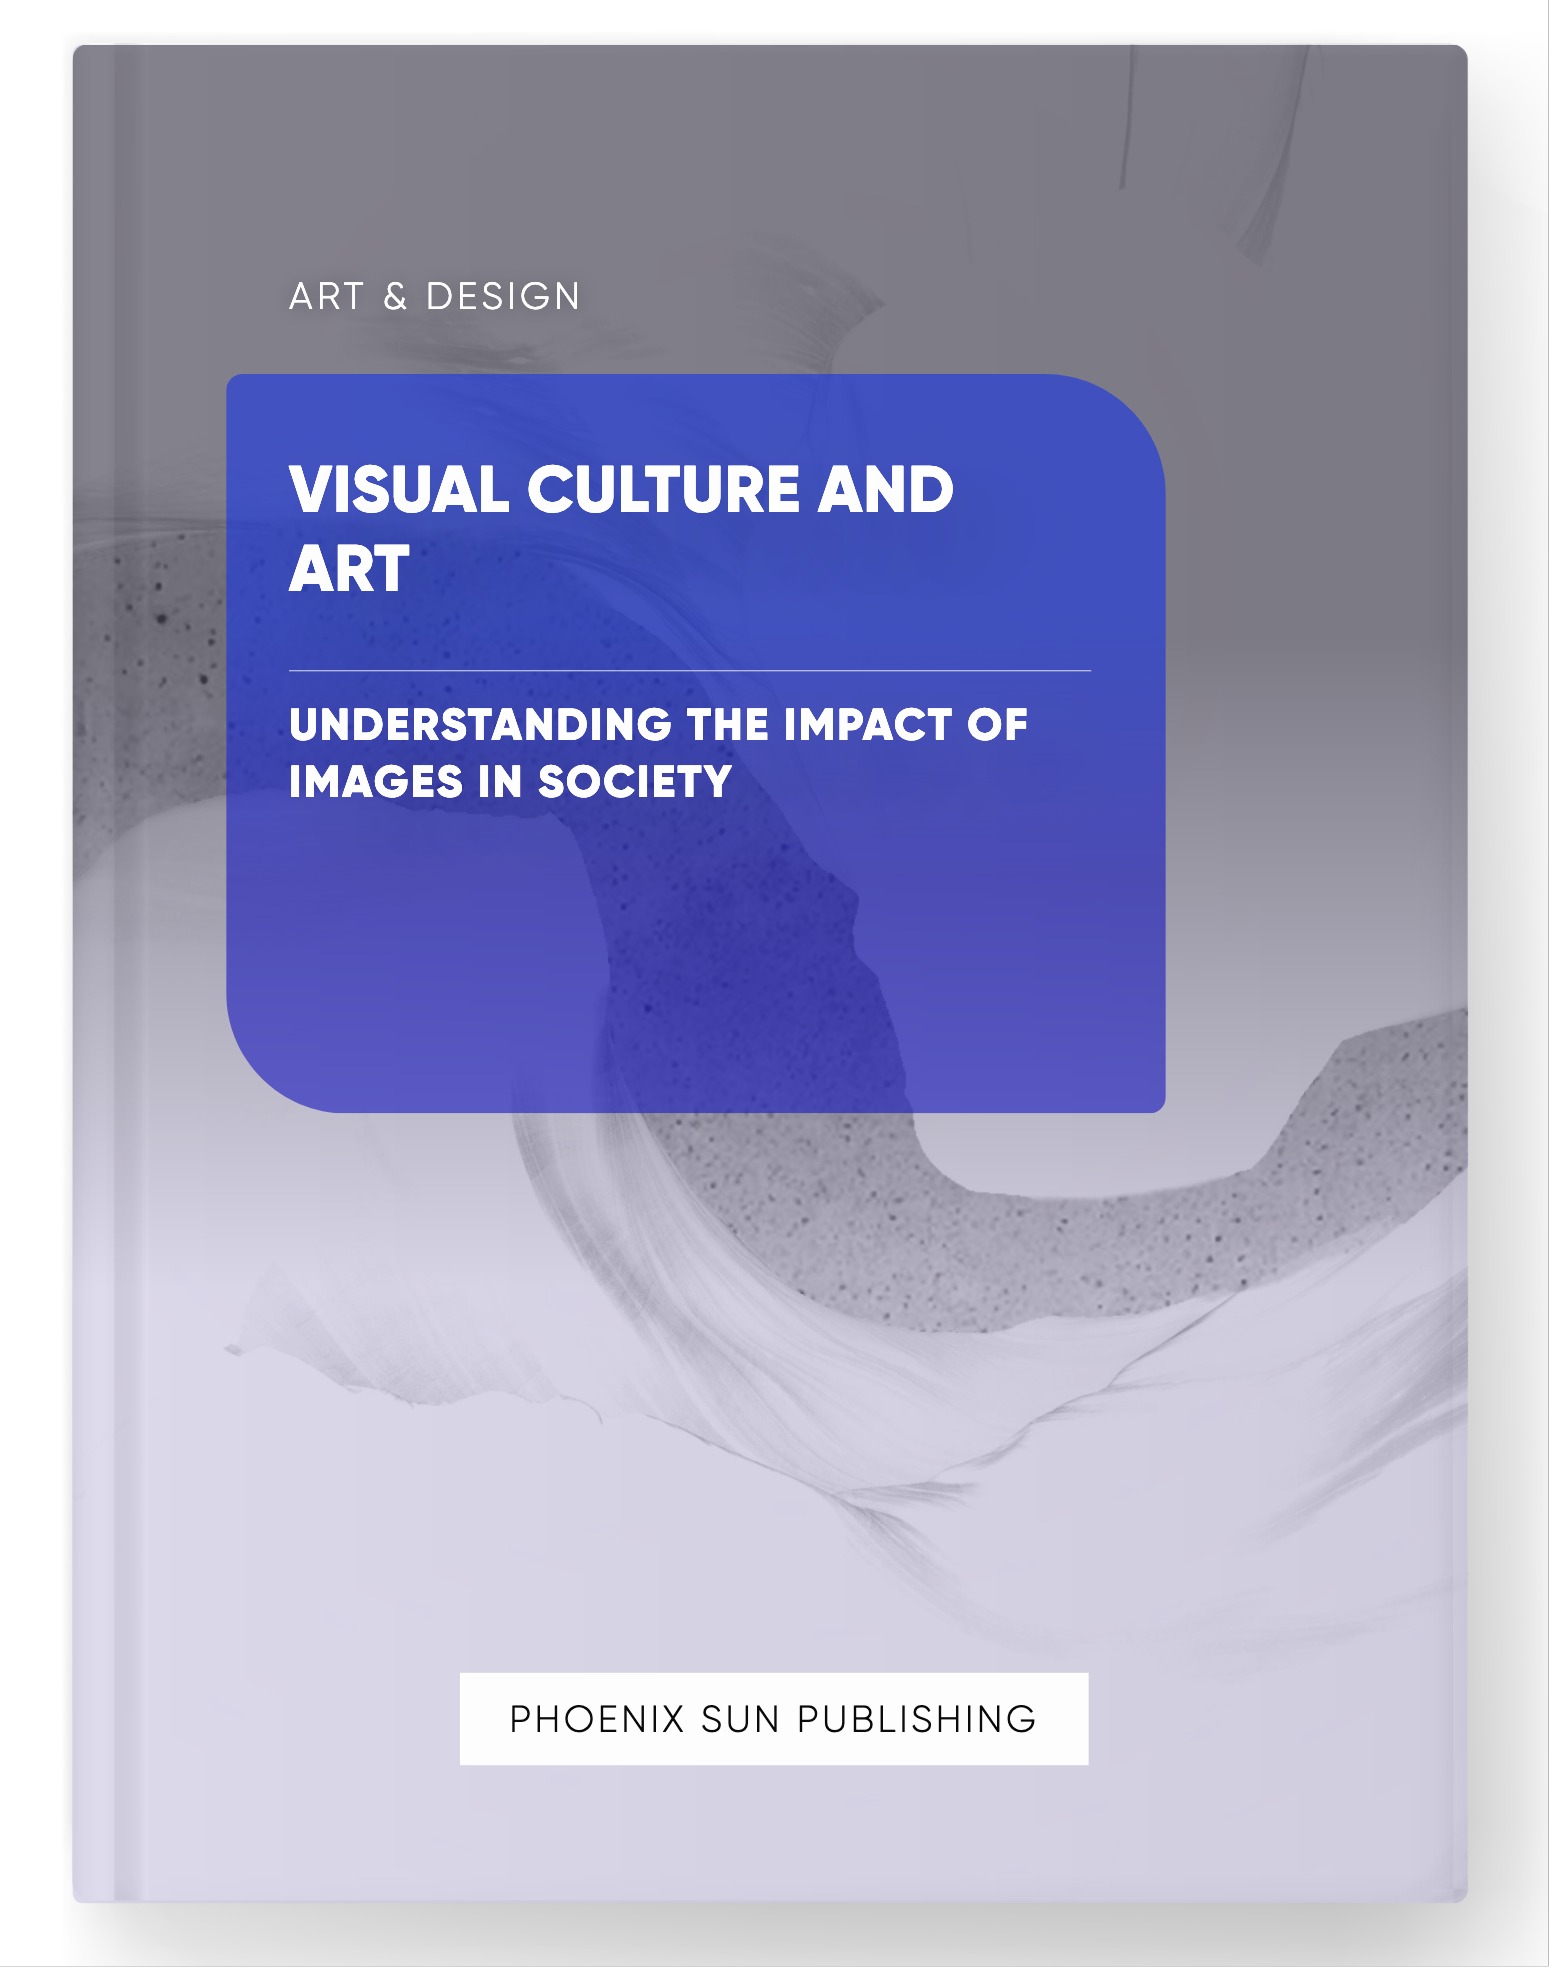 Visual Culture and Art – Understanding the Impact of Images in Society